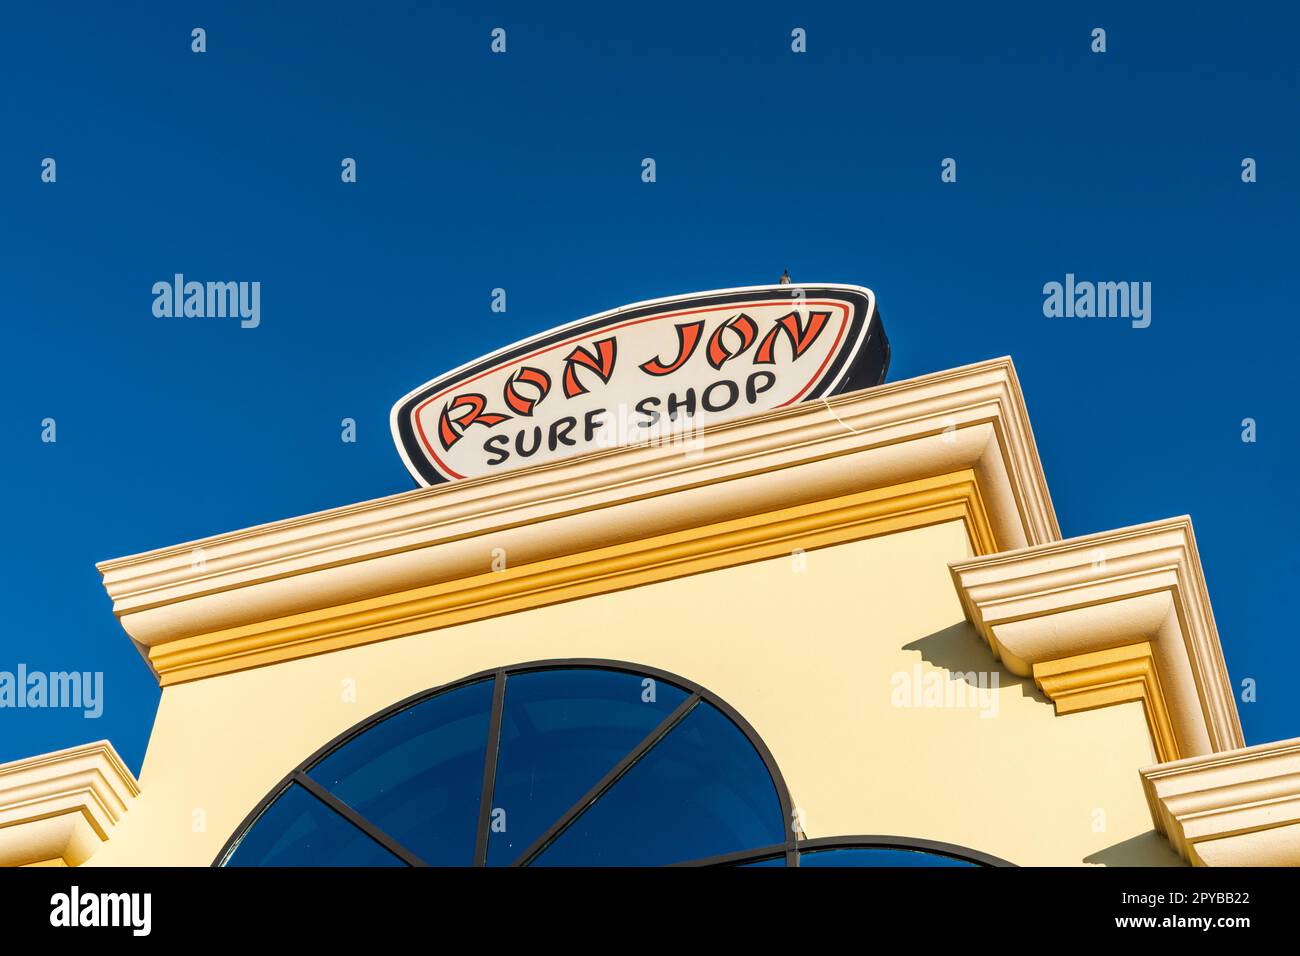 Cocoa Beach, Florida - December 29, 2022: Exterior of the famous Ron Jon surf shop, the largest surfing goods store in the world Stock Photo